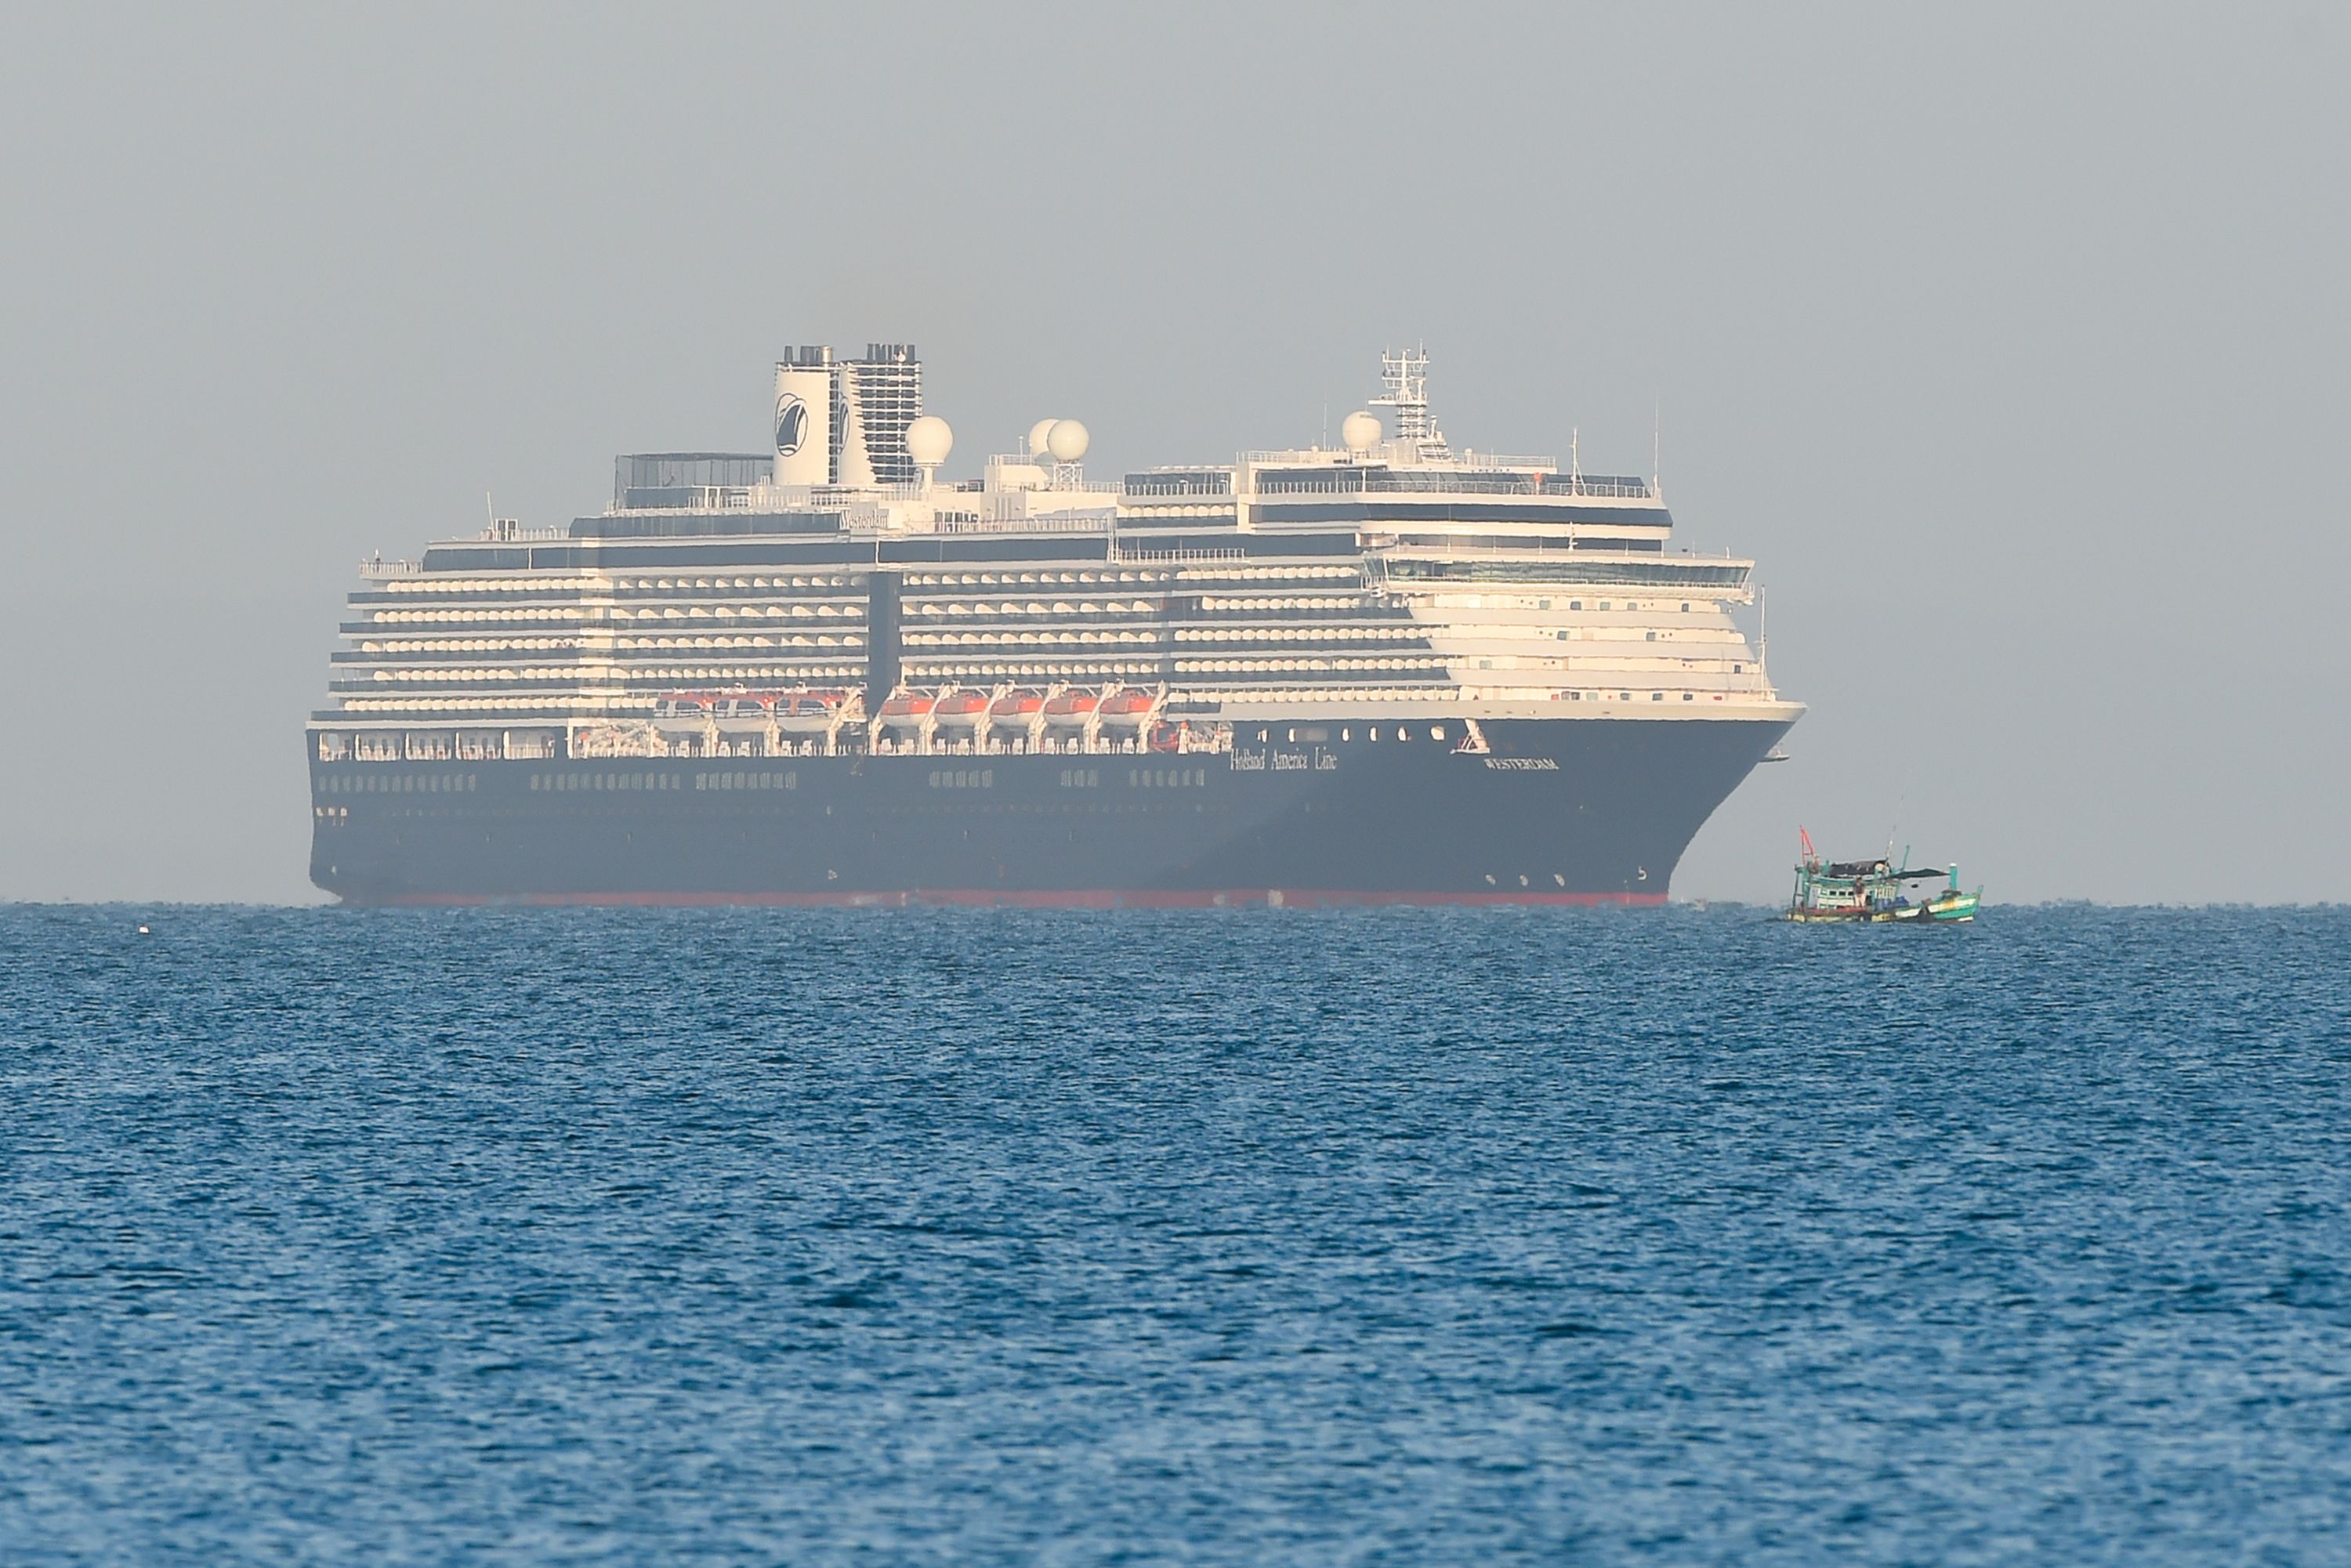 The Westerdam cruise ship approaches port in Sihanoukville, on Cambodia's southern coast where the liner had received permission to dock.